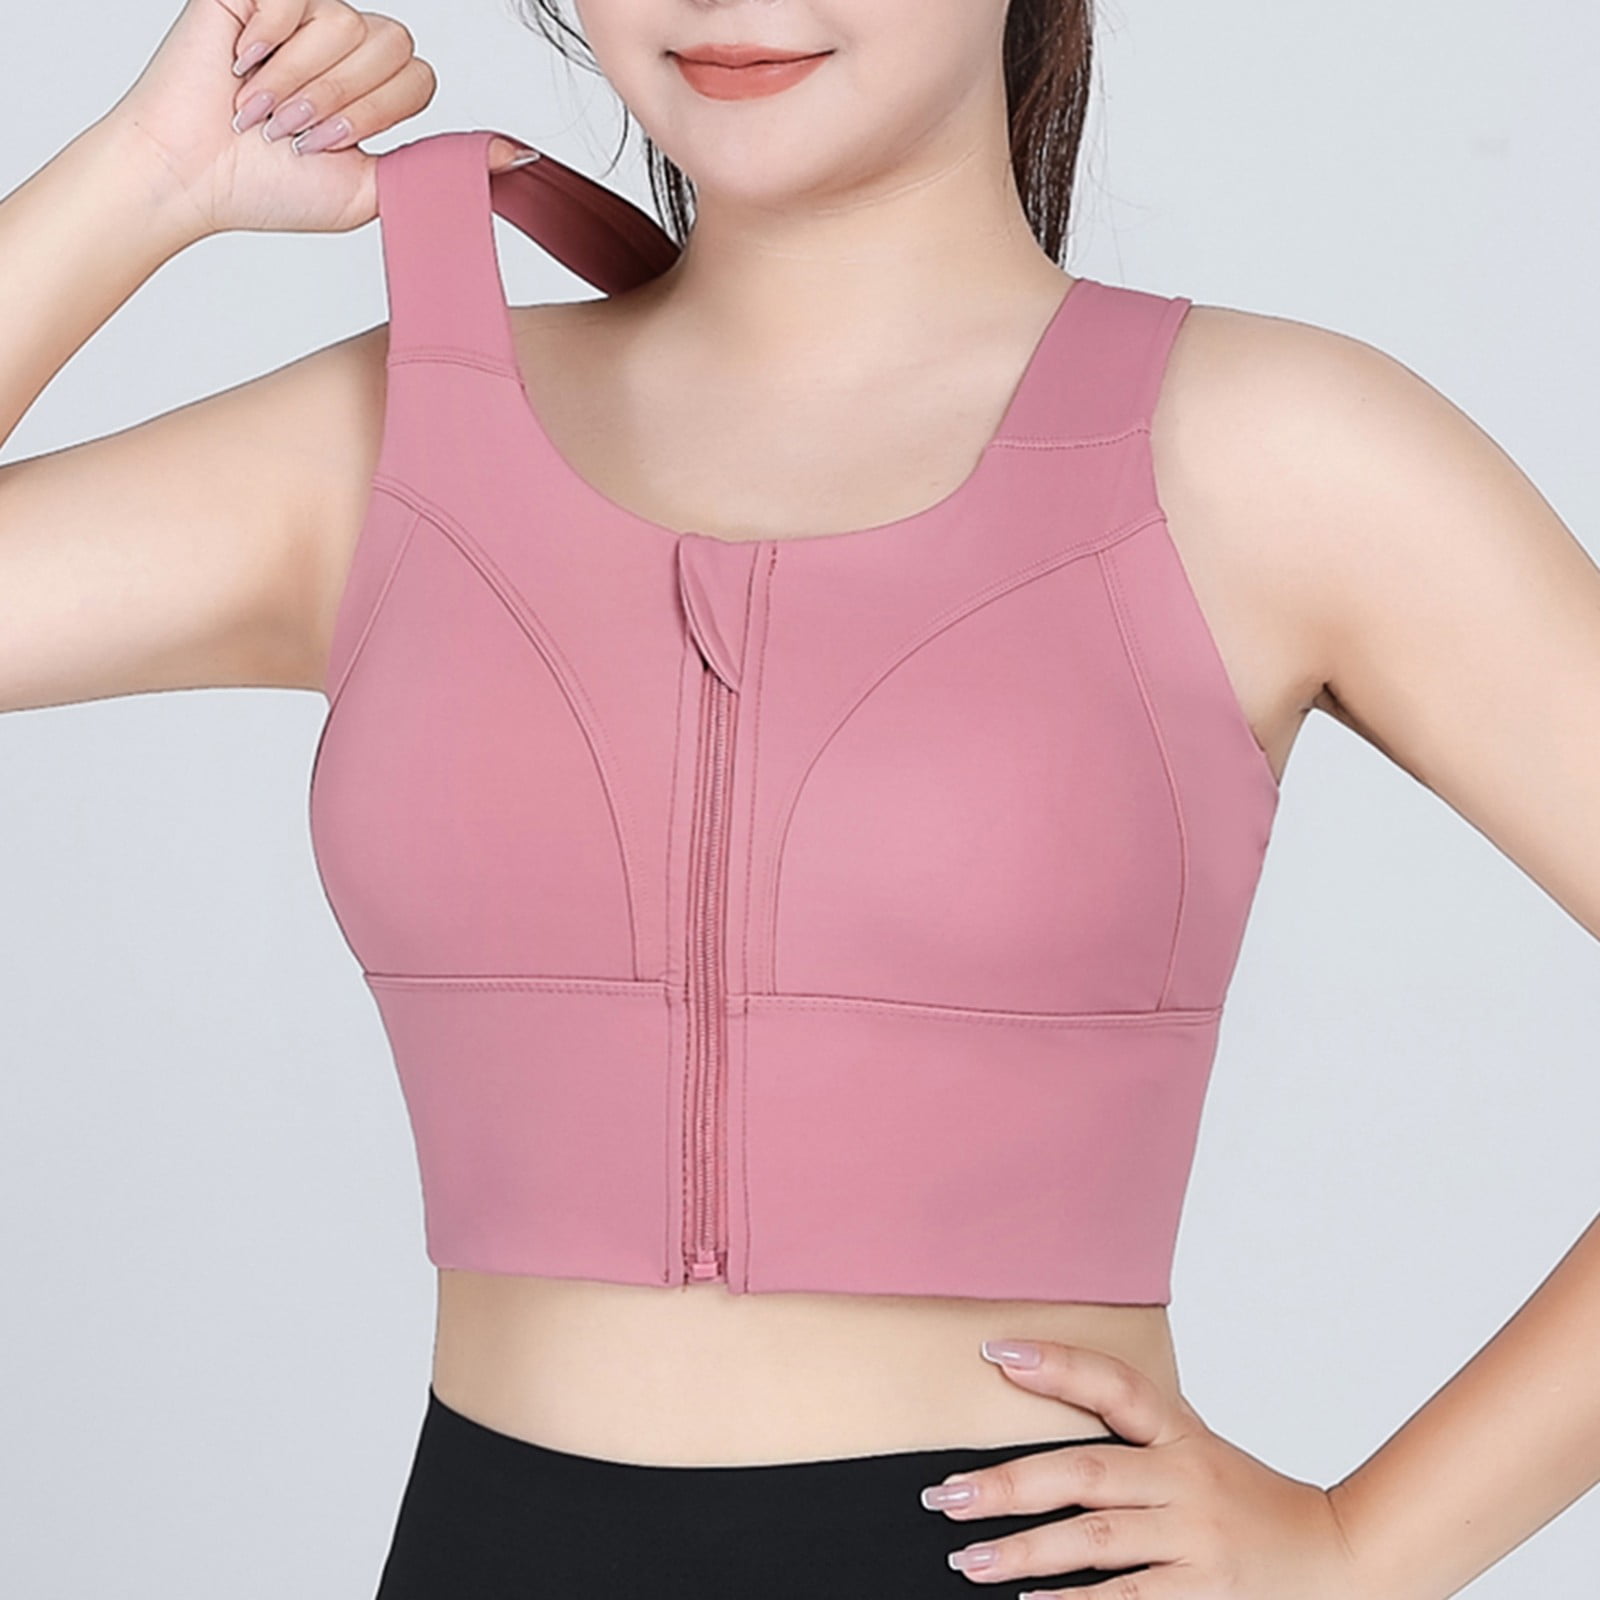 Sexy High Impact Sports Bras for Women